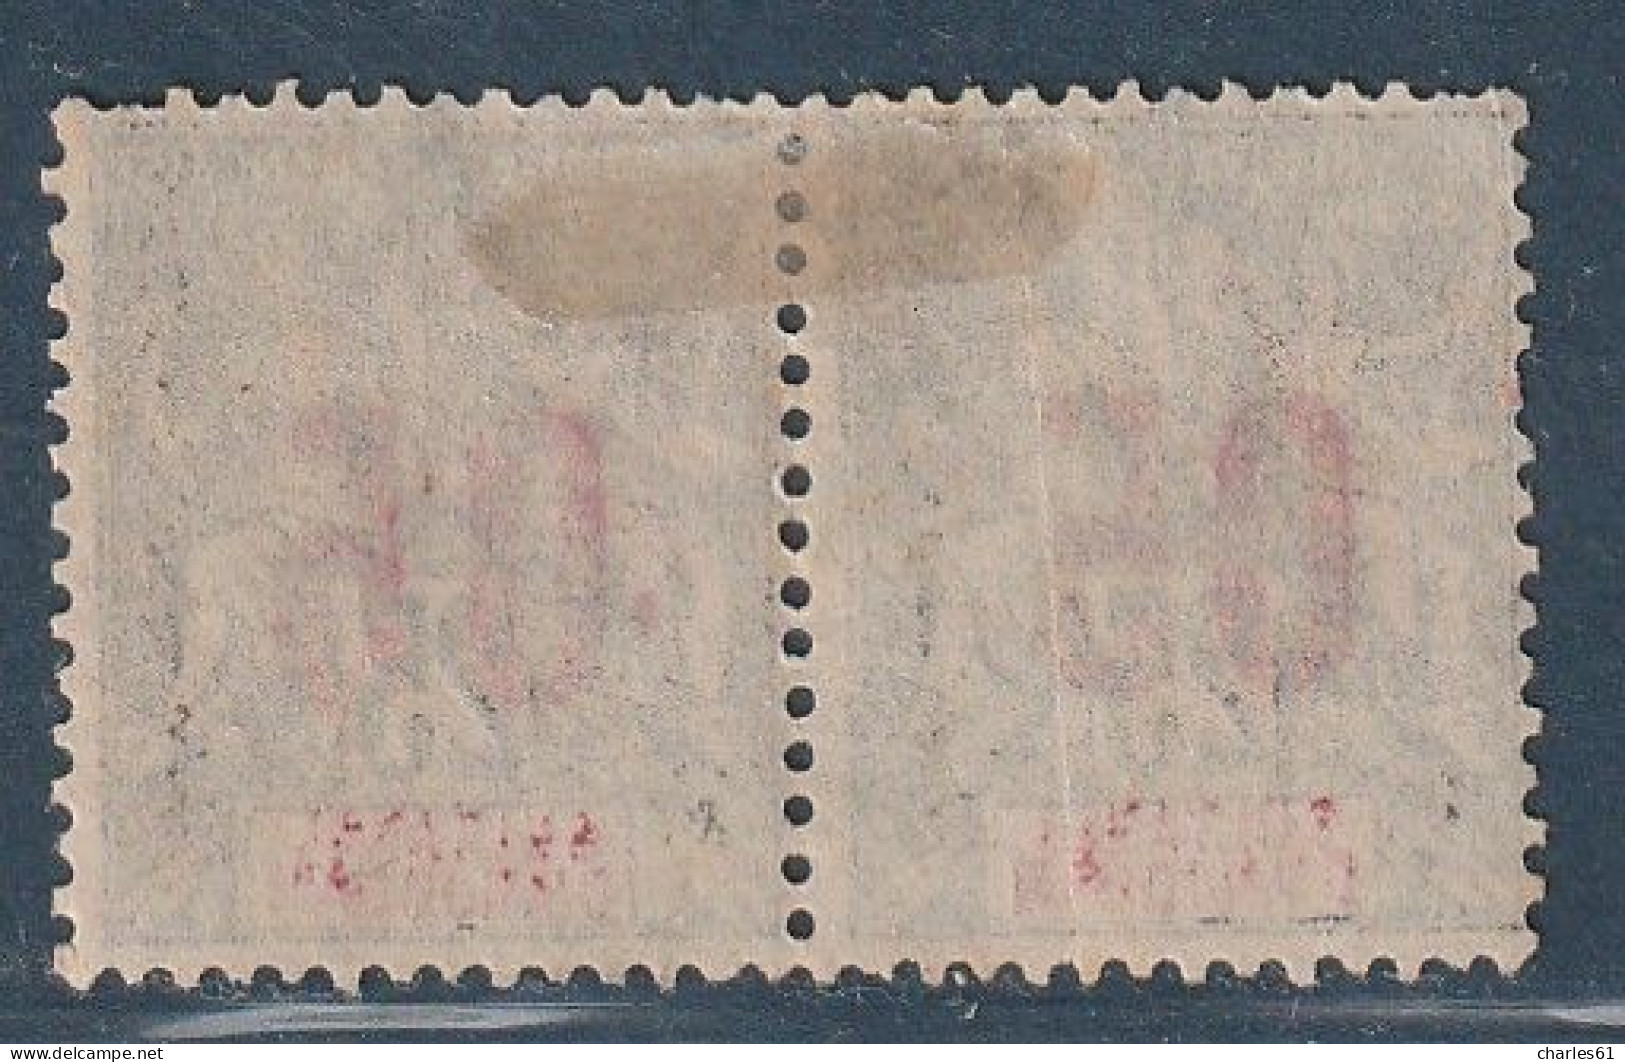 ANJOUAN - N°24Aa Obl  (1912) 05 S.25c : Chriffres Espacés.(24+24A Se Tenant) - Used Stamps